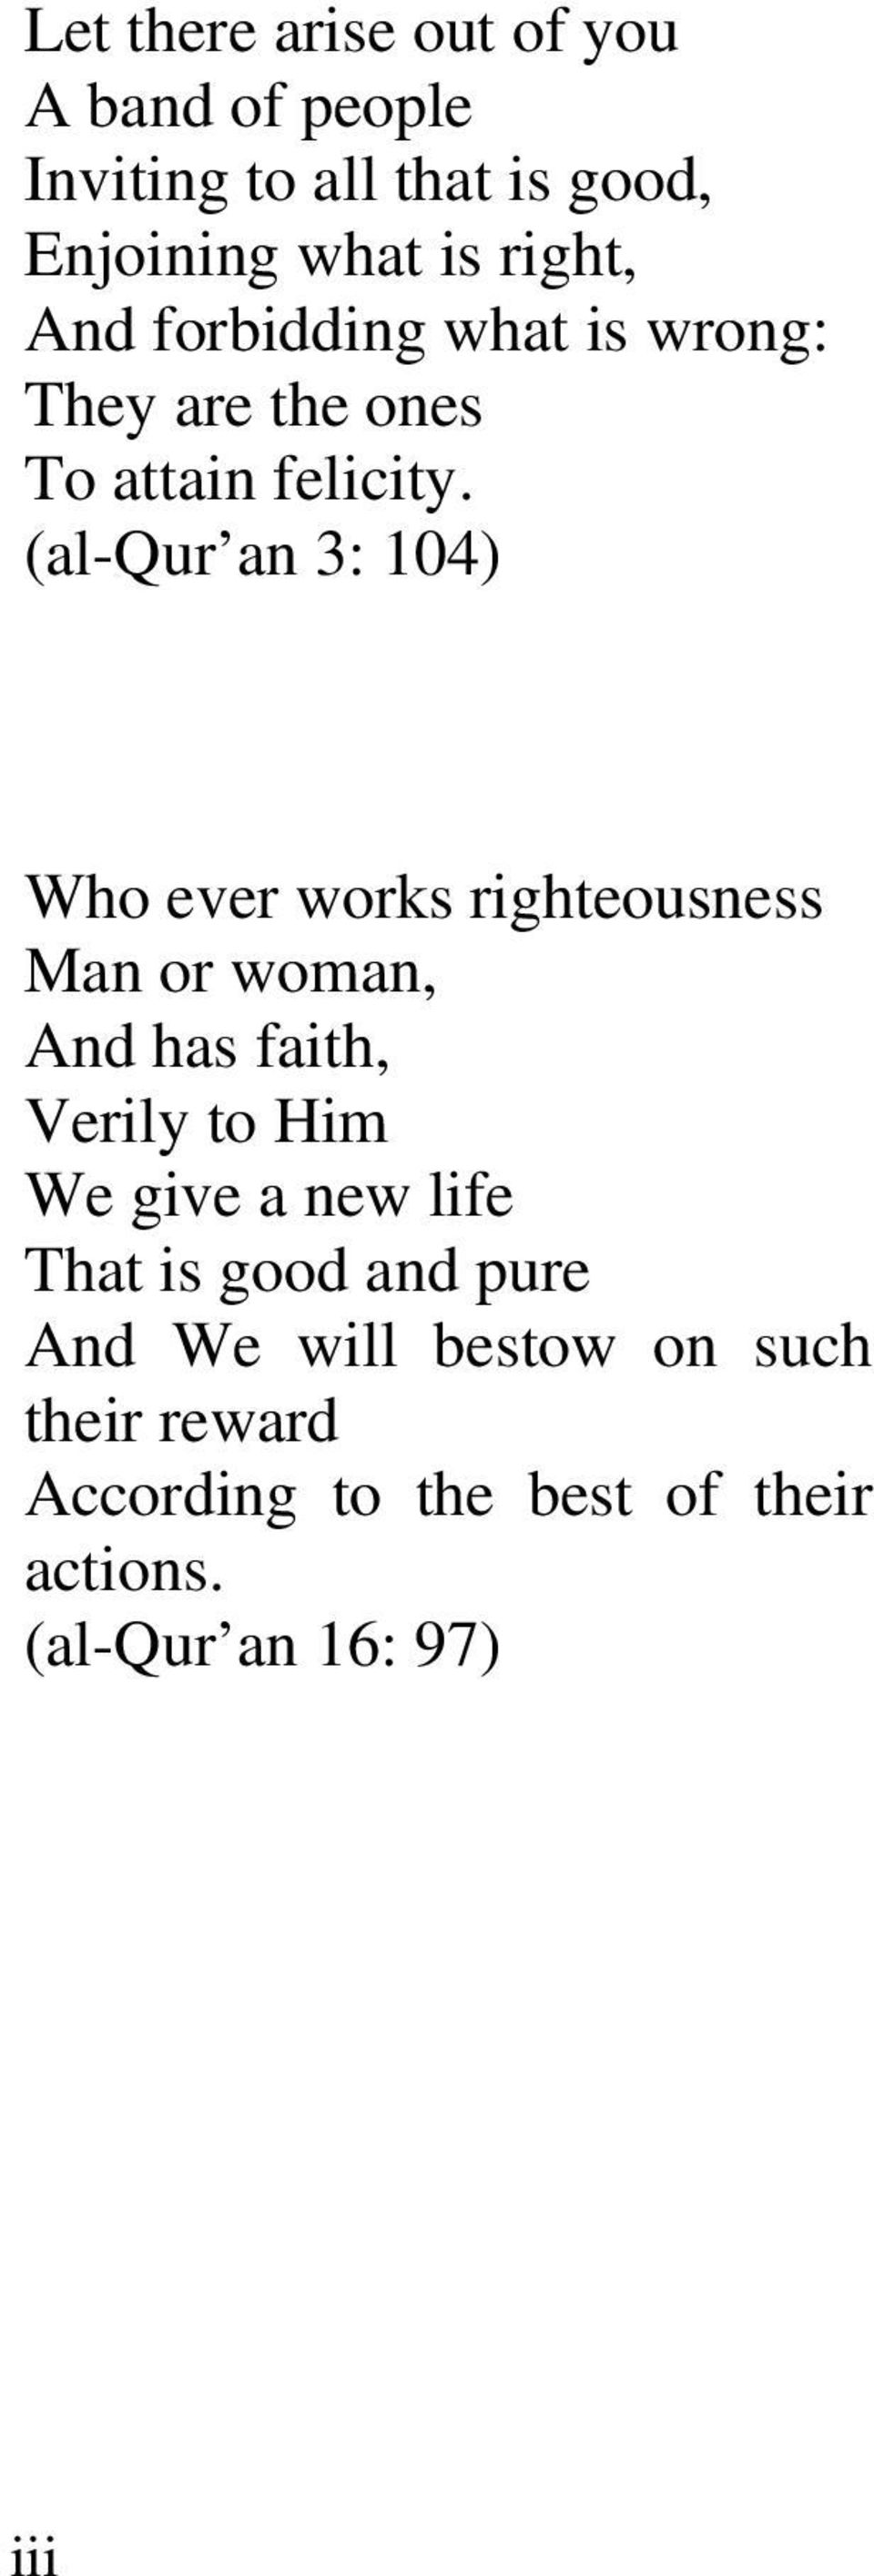 (al-qur an 3: 104) Who ever works righteousness Man or woman, And has faith, Verily to Him We give a